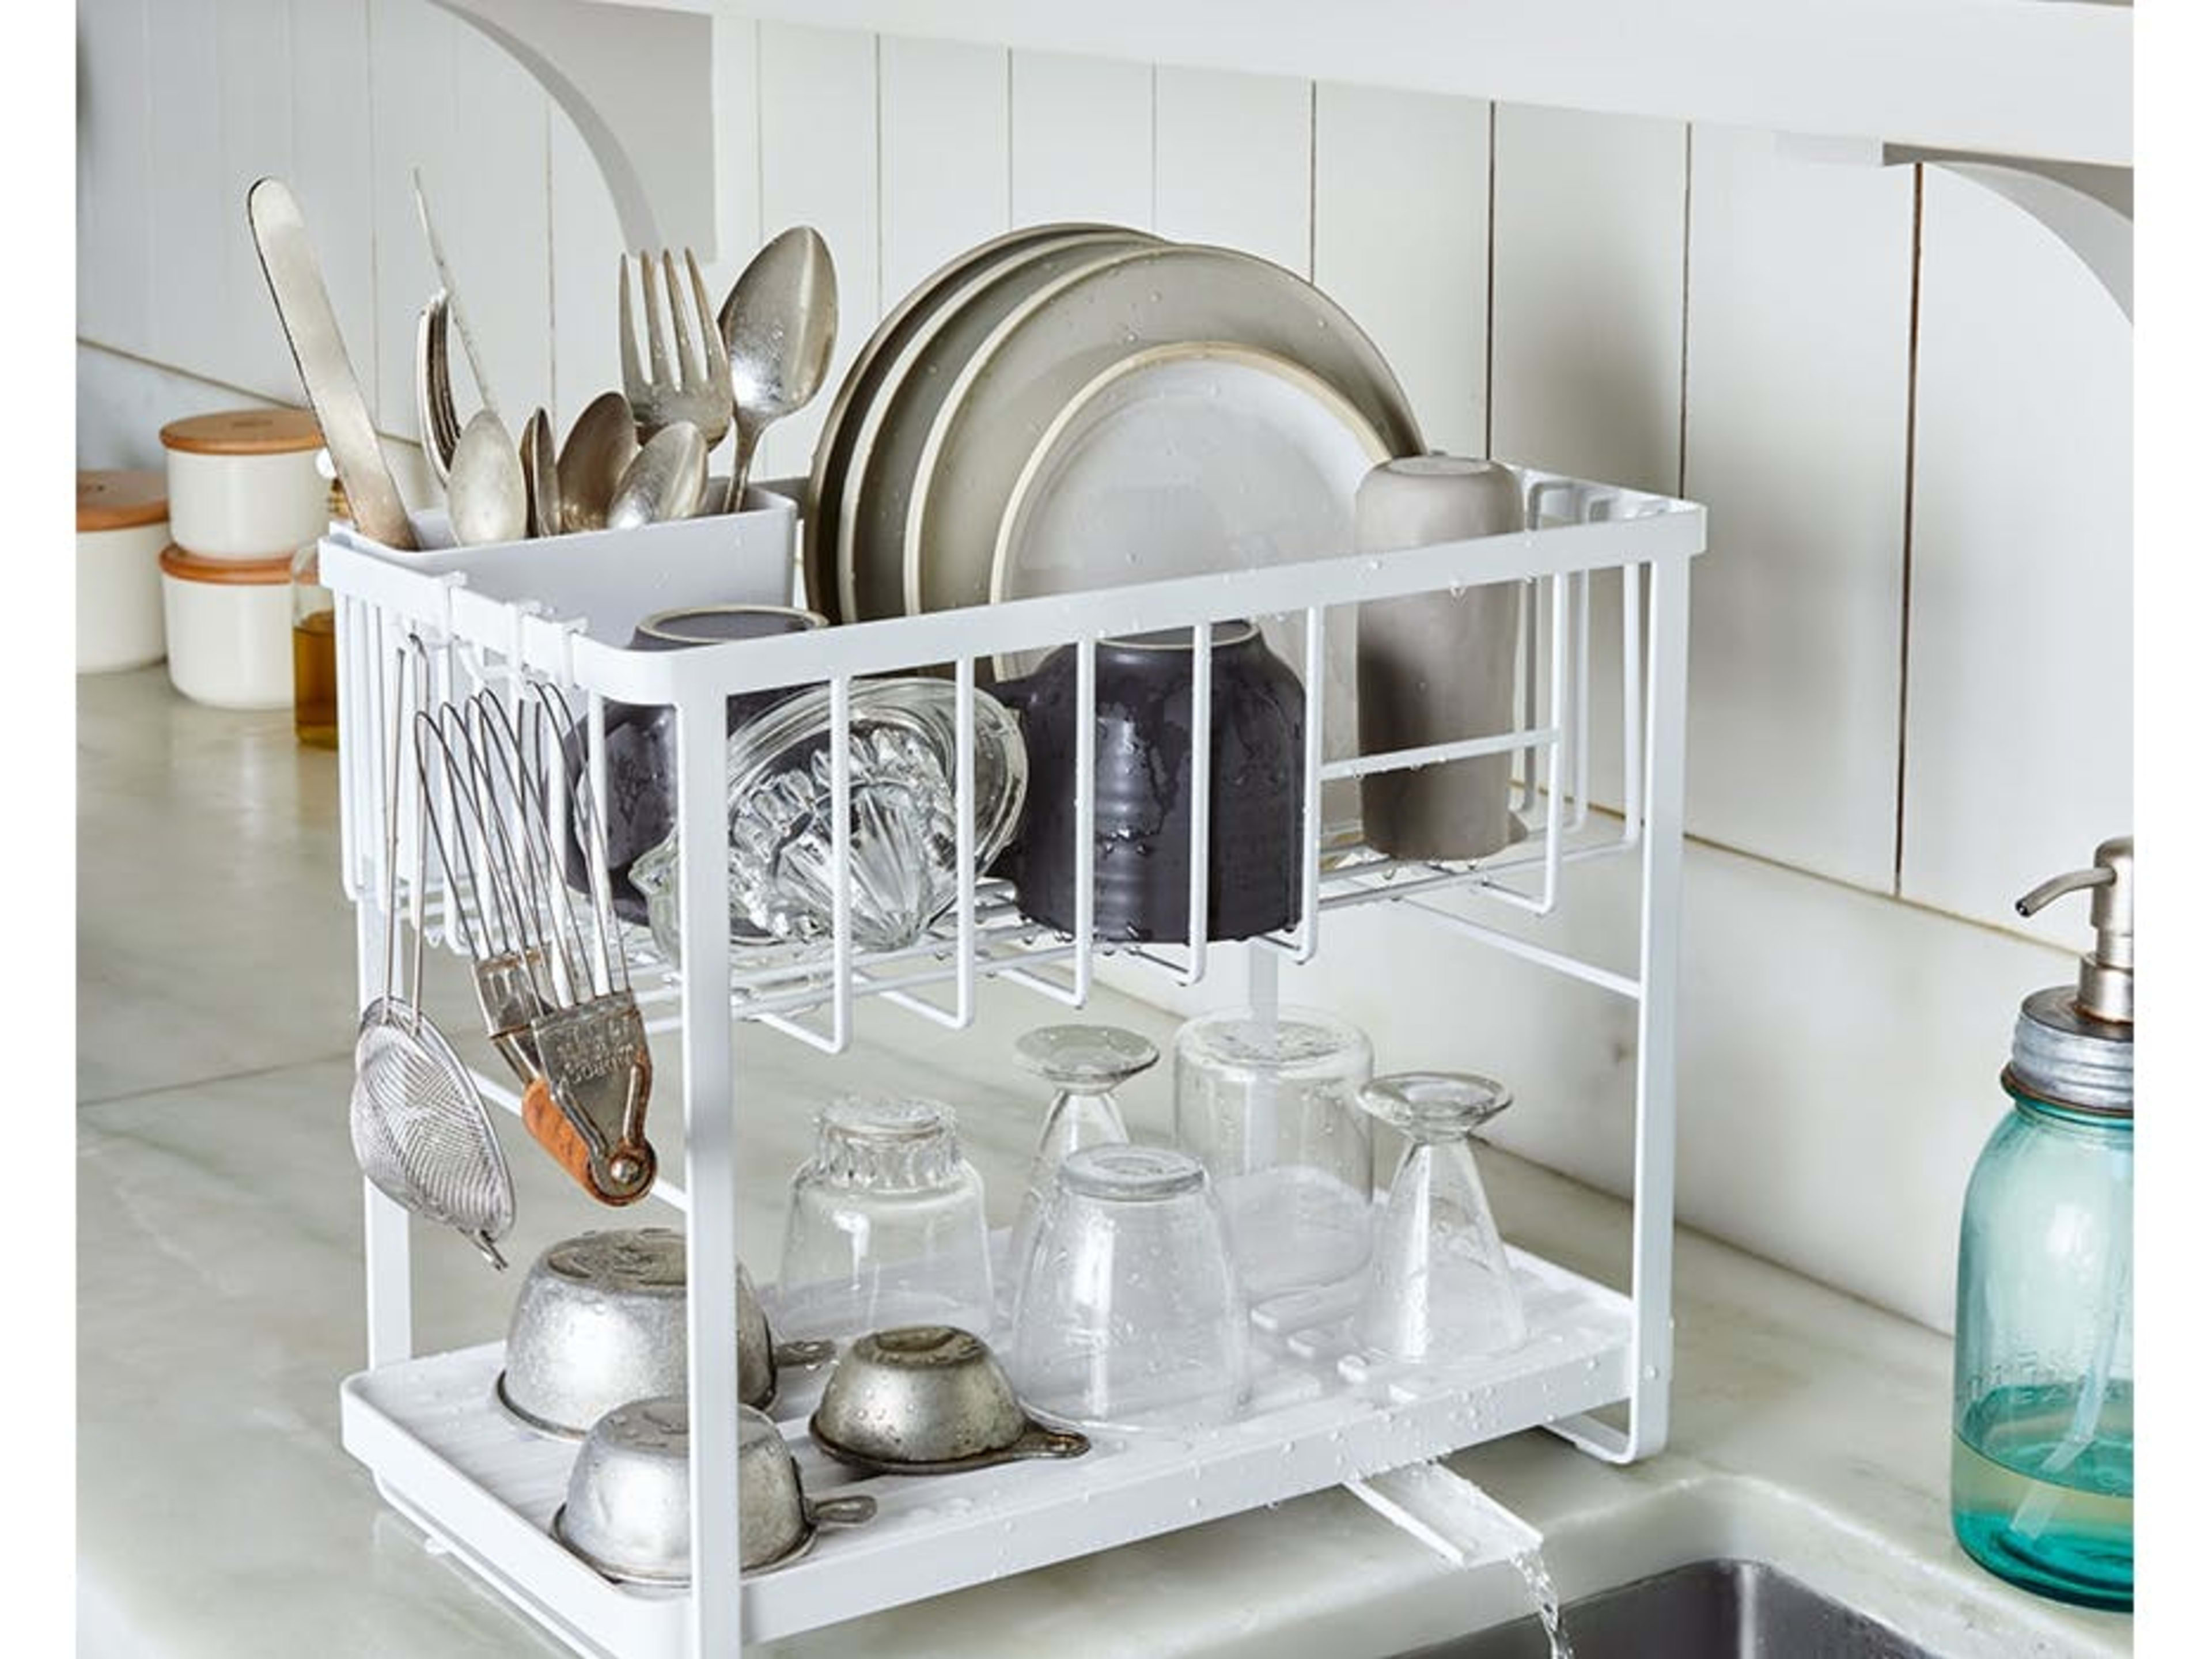 20 Very Useful Kitchen Things Under $100 From Food52 Everyone Should Get image